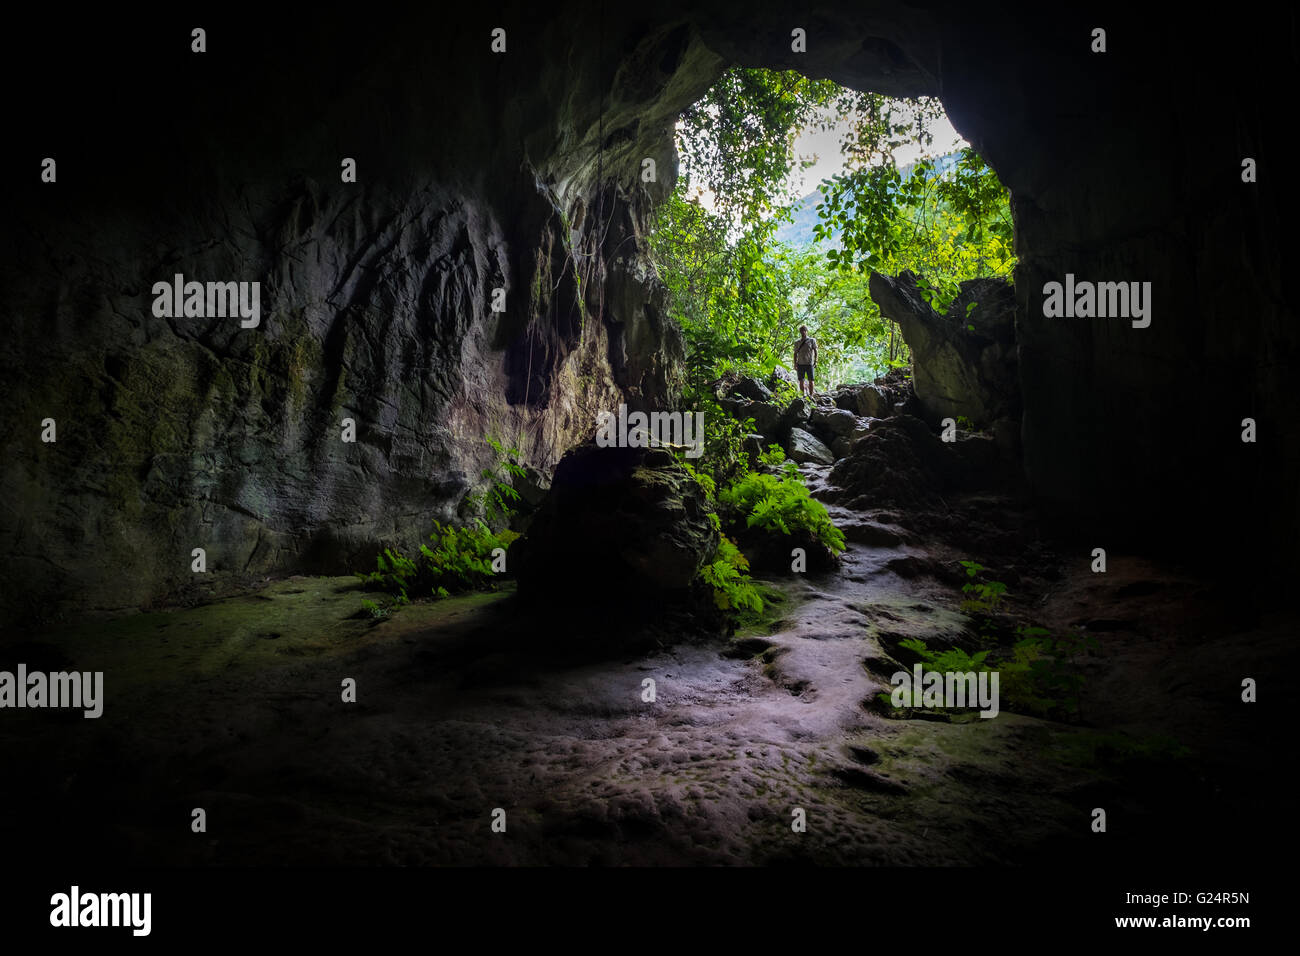 A man standing and looking into Tham Kang Cave near Nong Khiaw in Laos Stock Photo